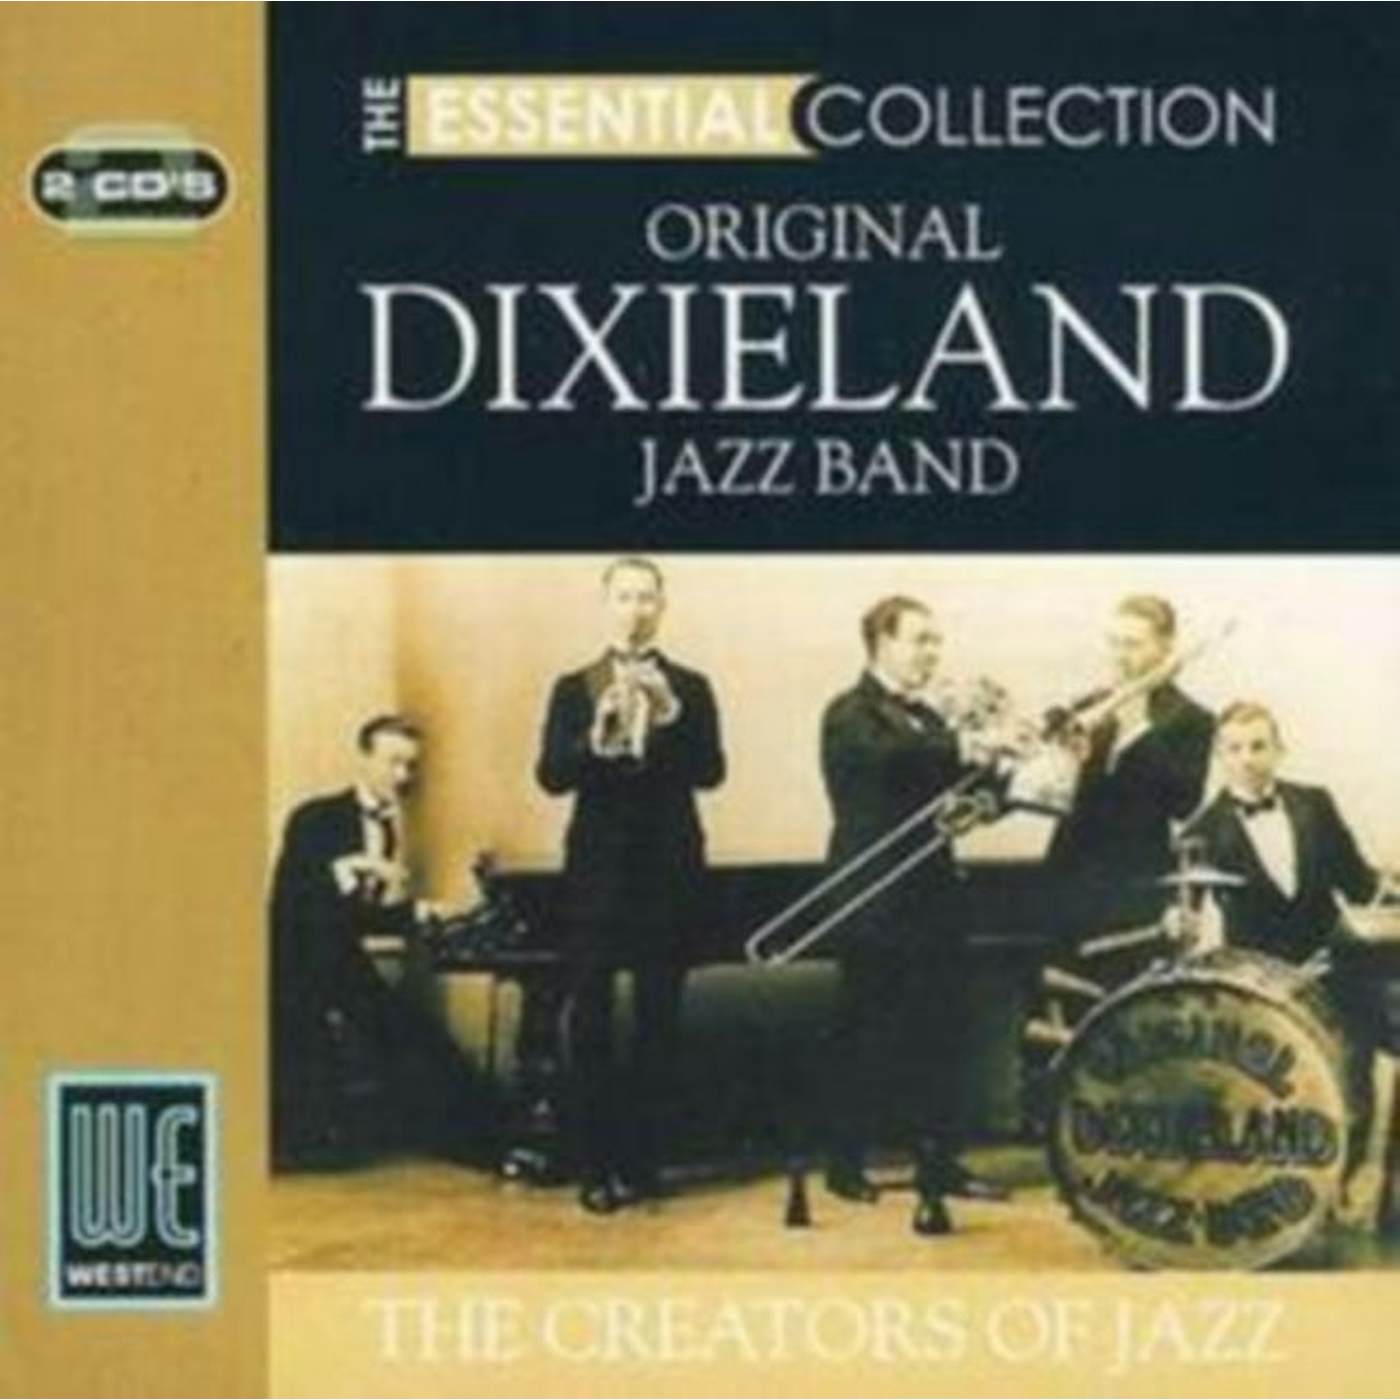 Original Dixieland Jazz Band CD - The Essential Collection